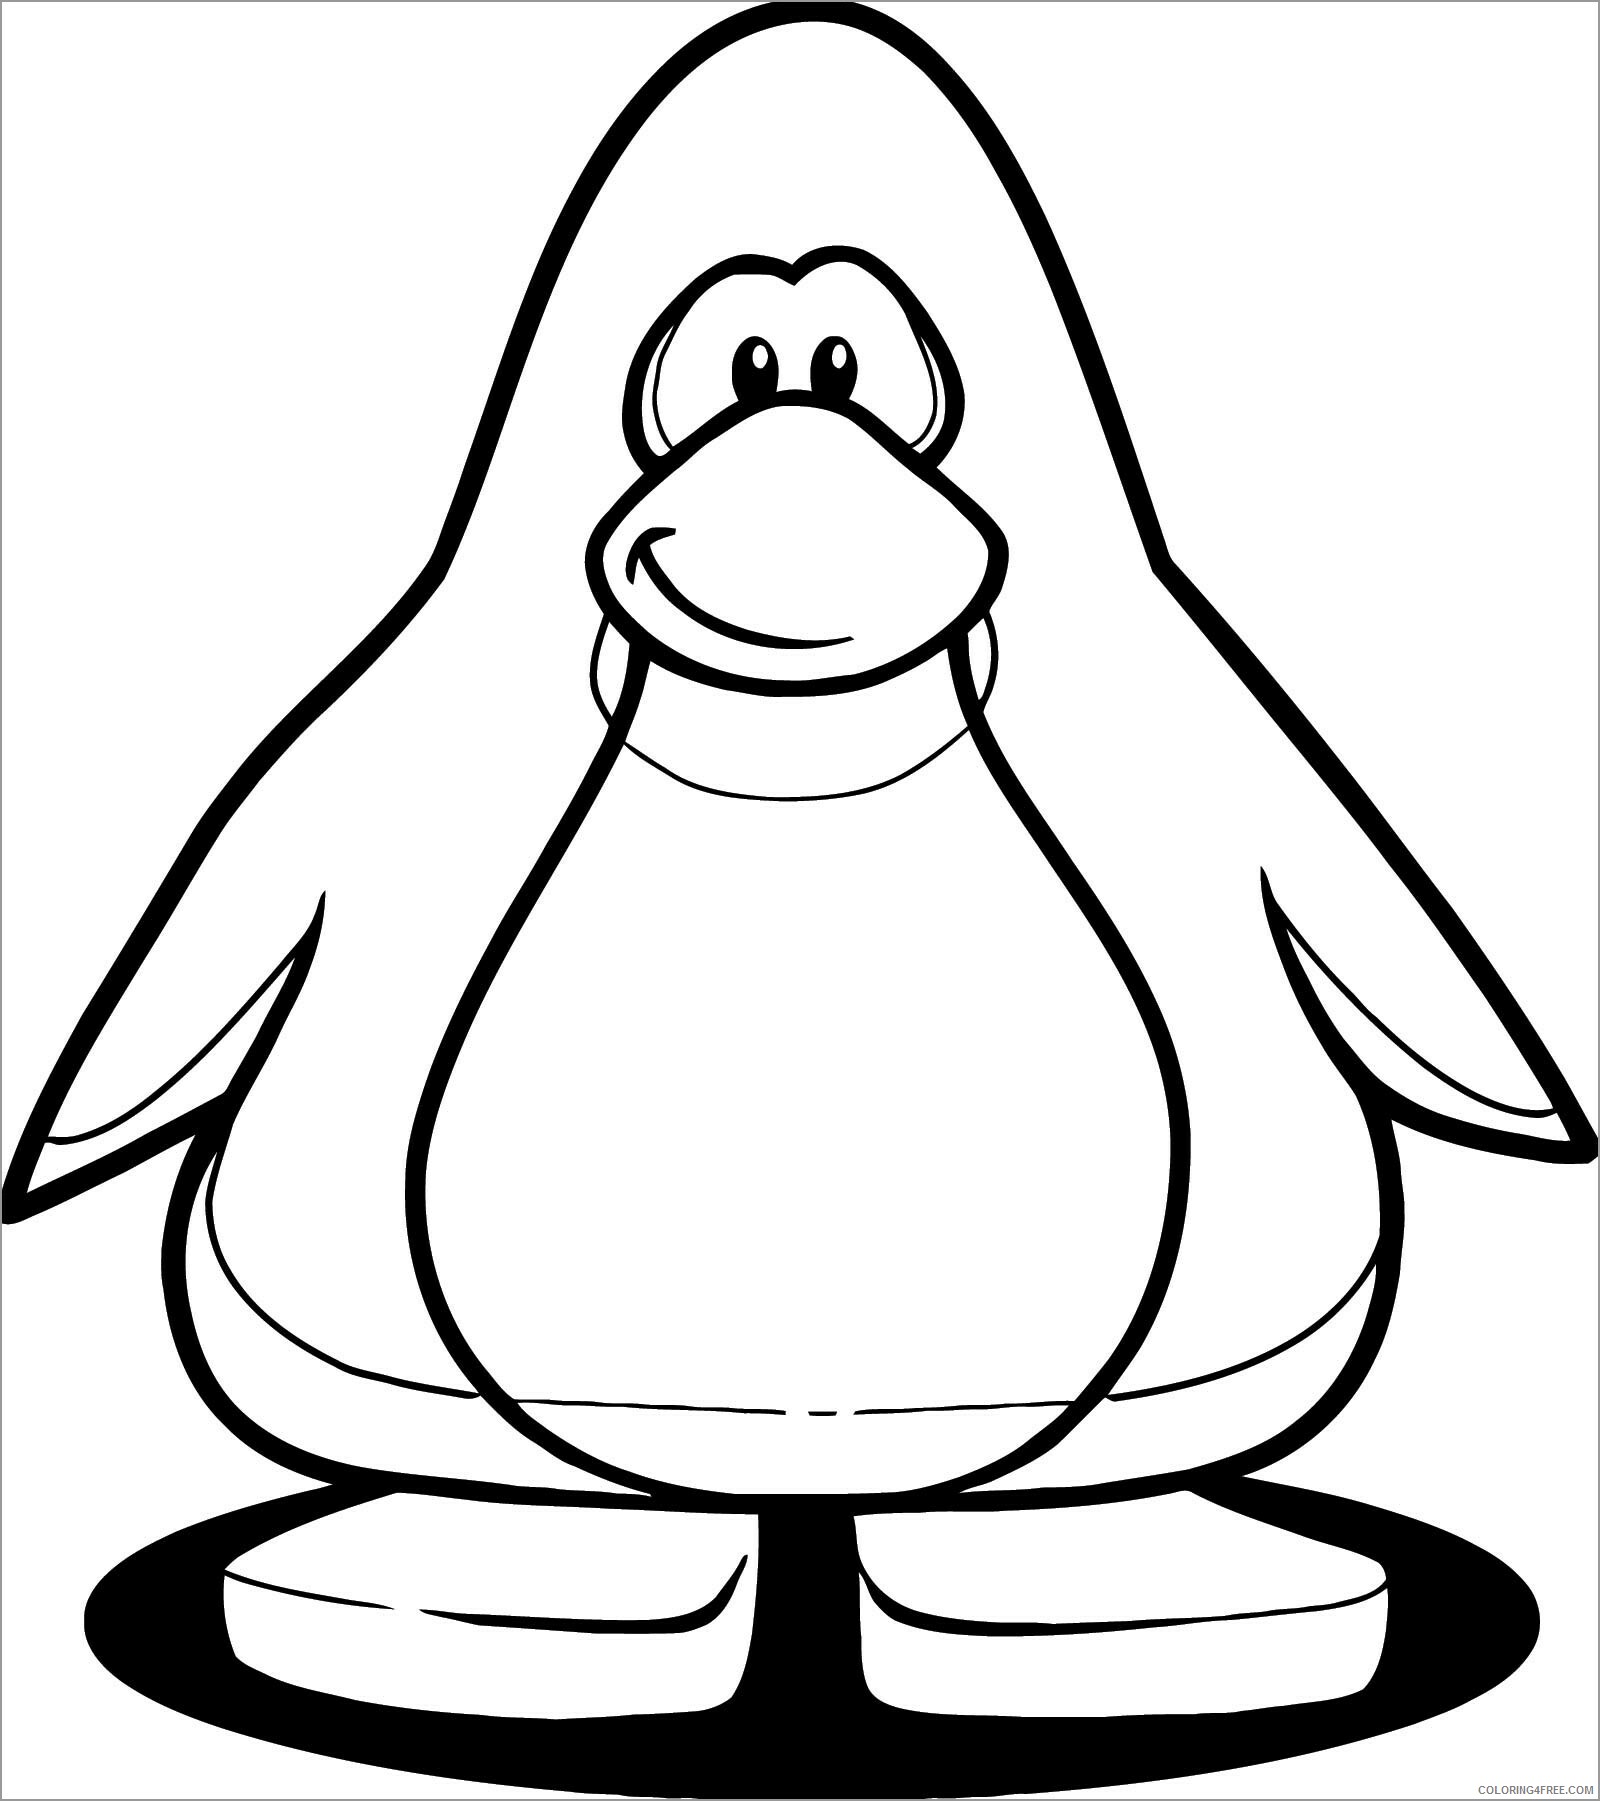 Penguins Coloring Pages Animal Printable Sheets grey penguin 2021 3822 Coloring4free